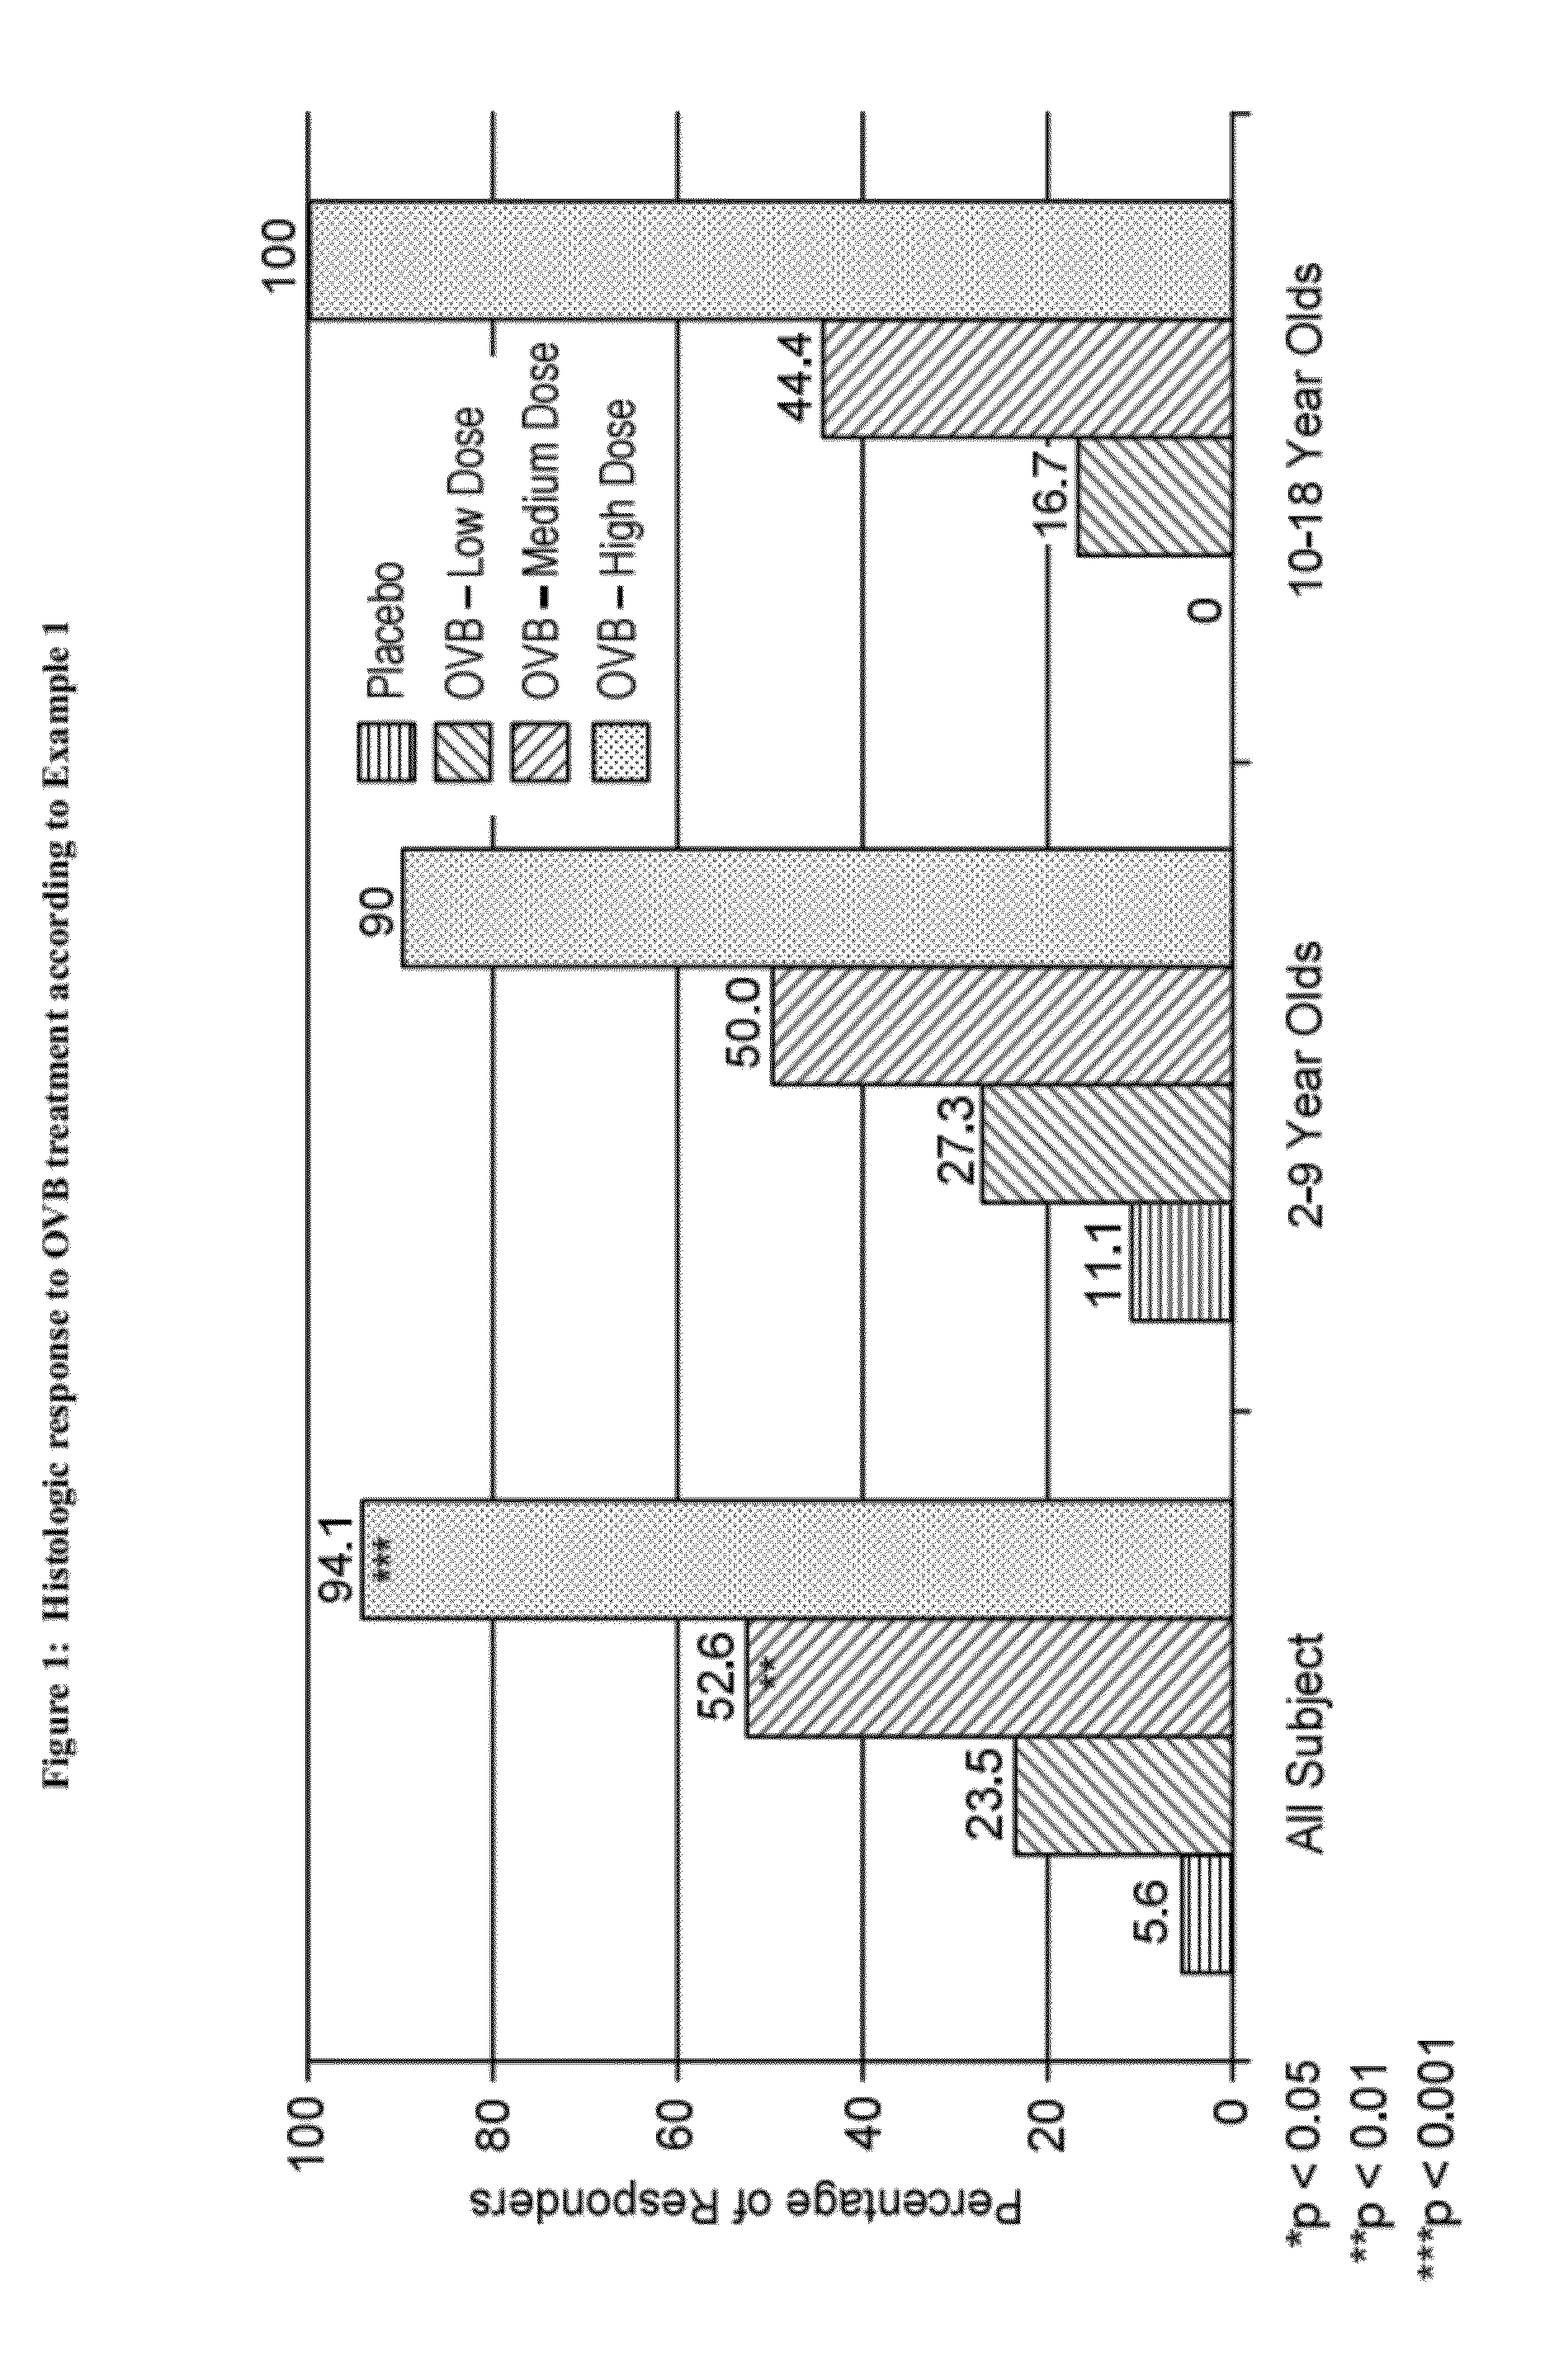 Methods of treatment for esophageal inflammation